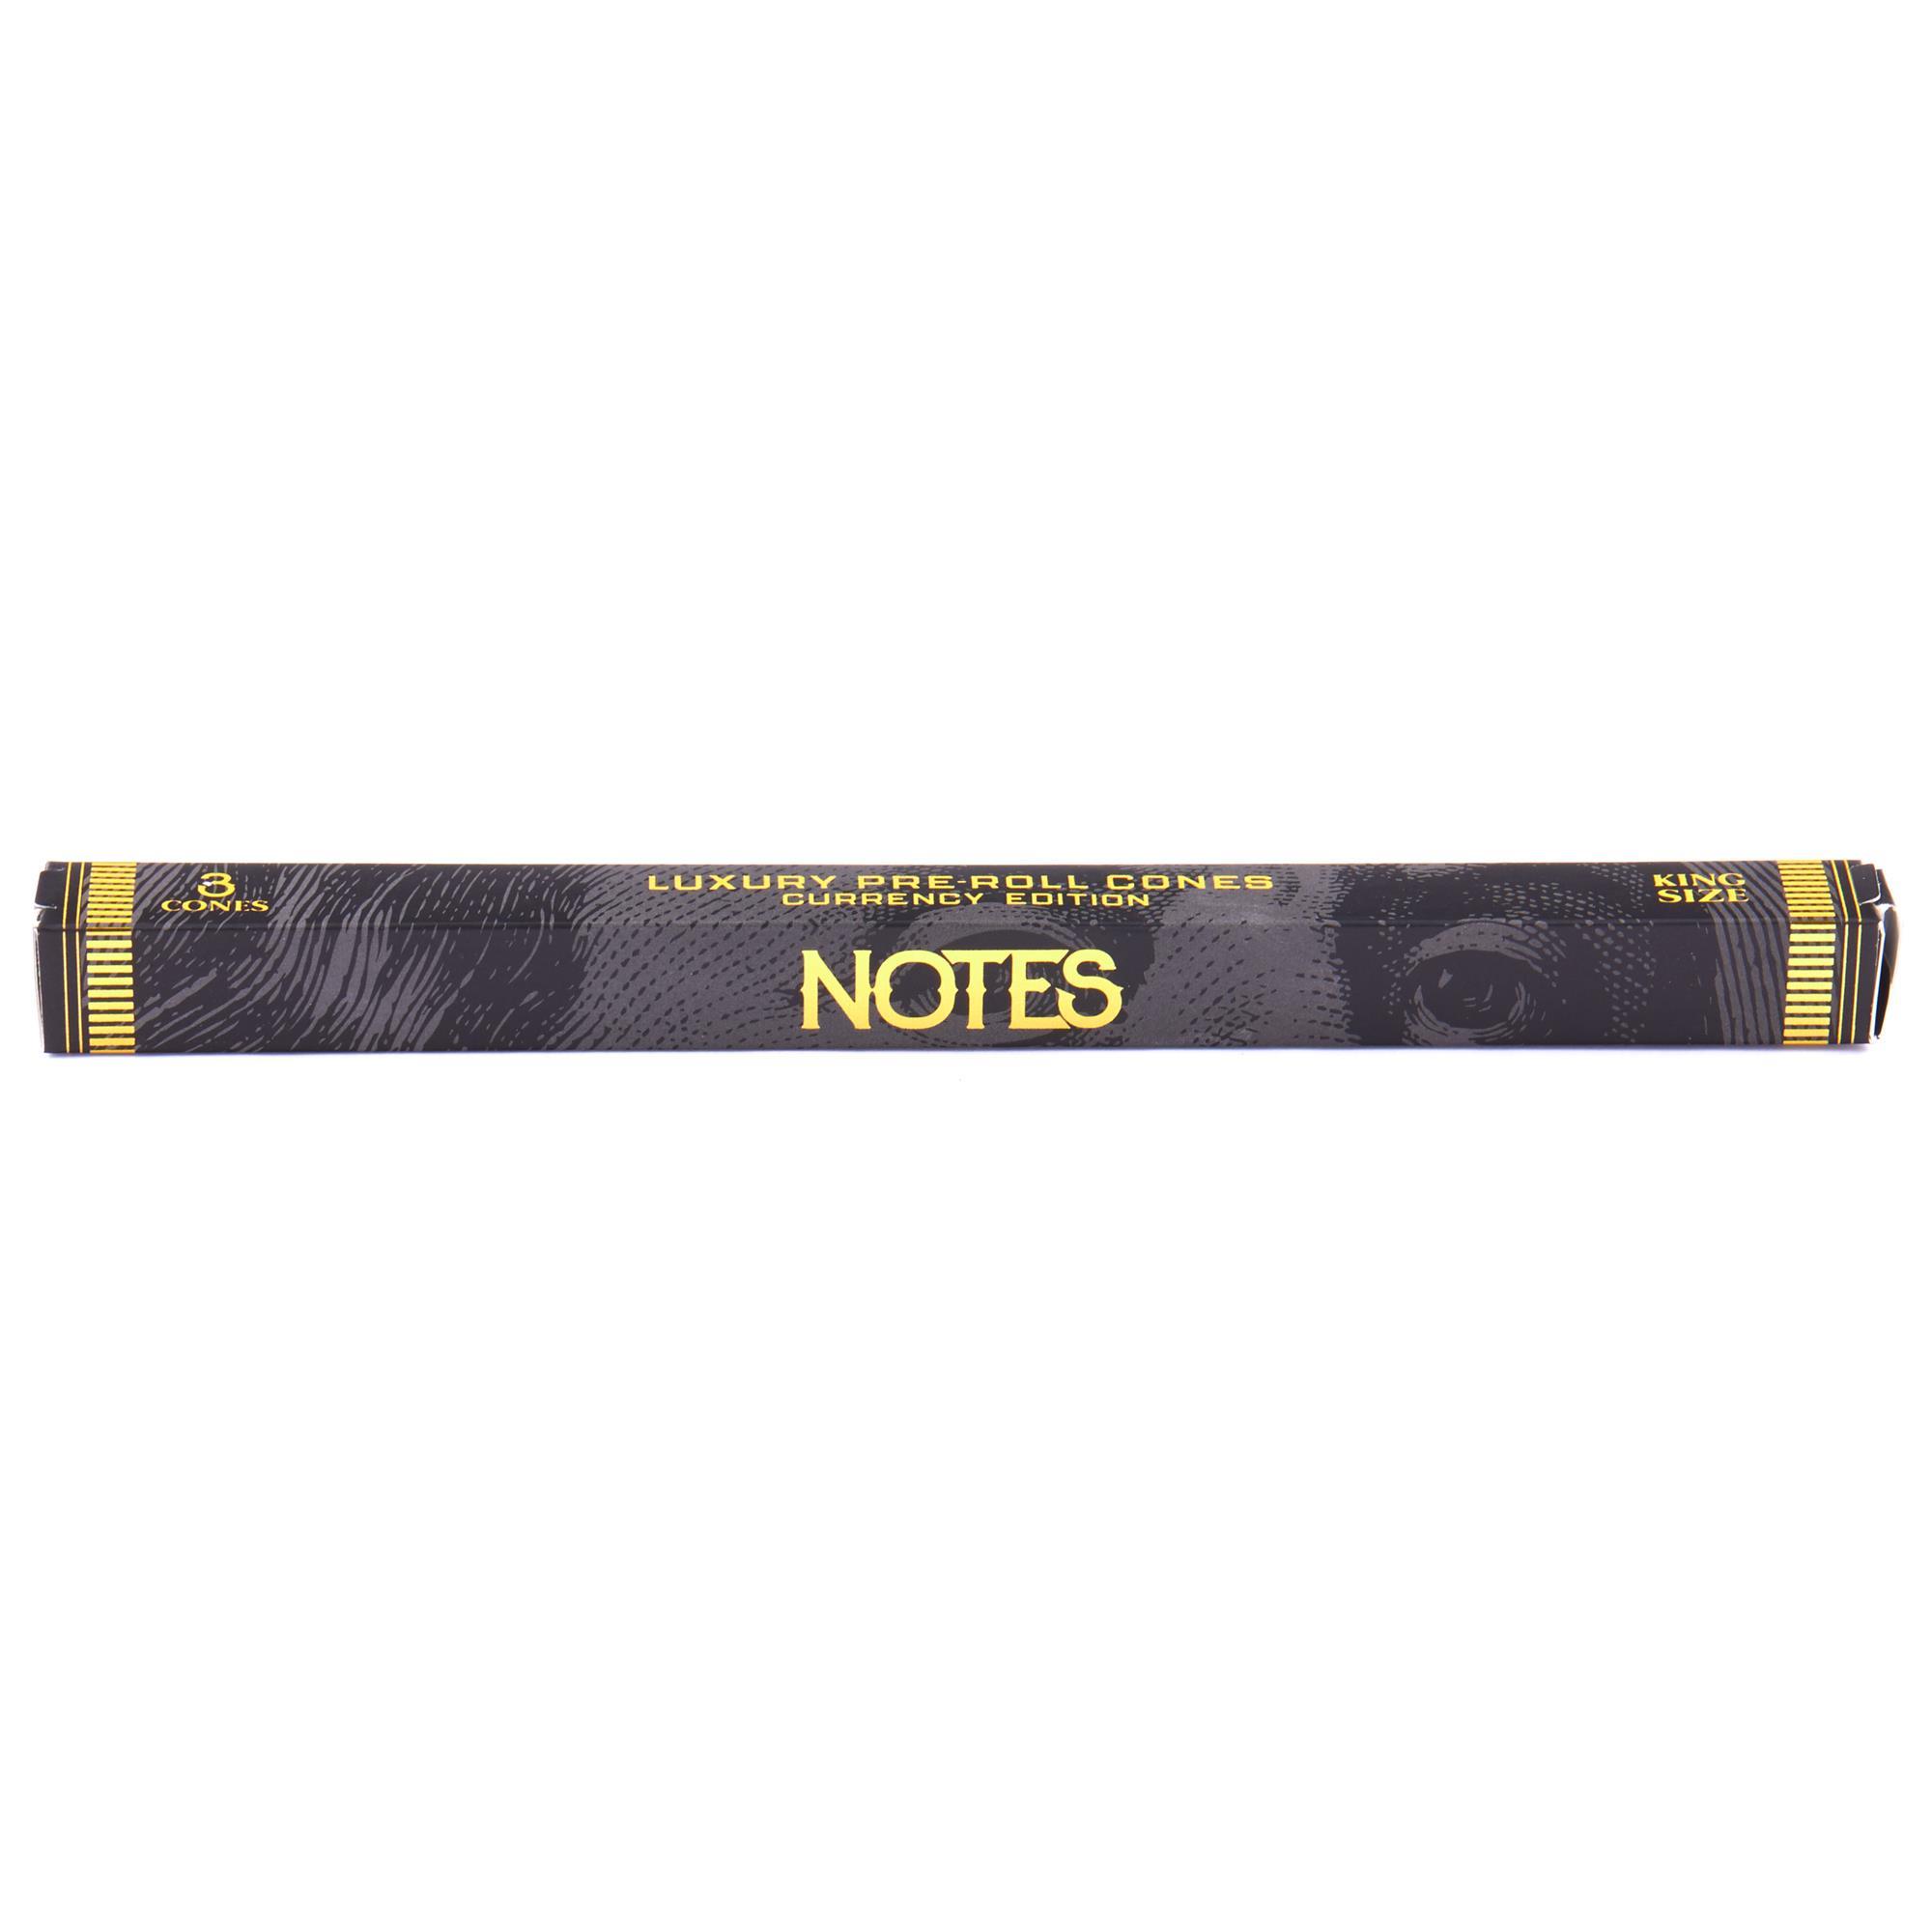 HEMPER NOTES PRE-ROLLED KING SIZE CONES